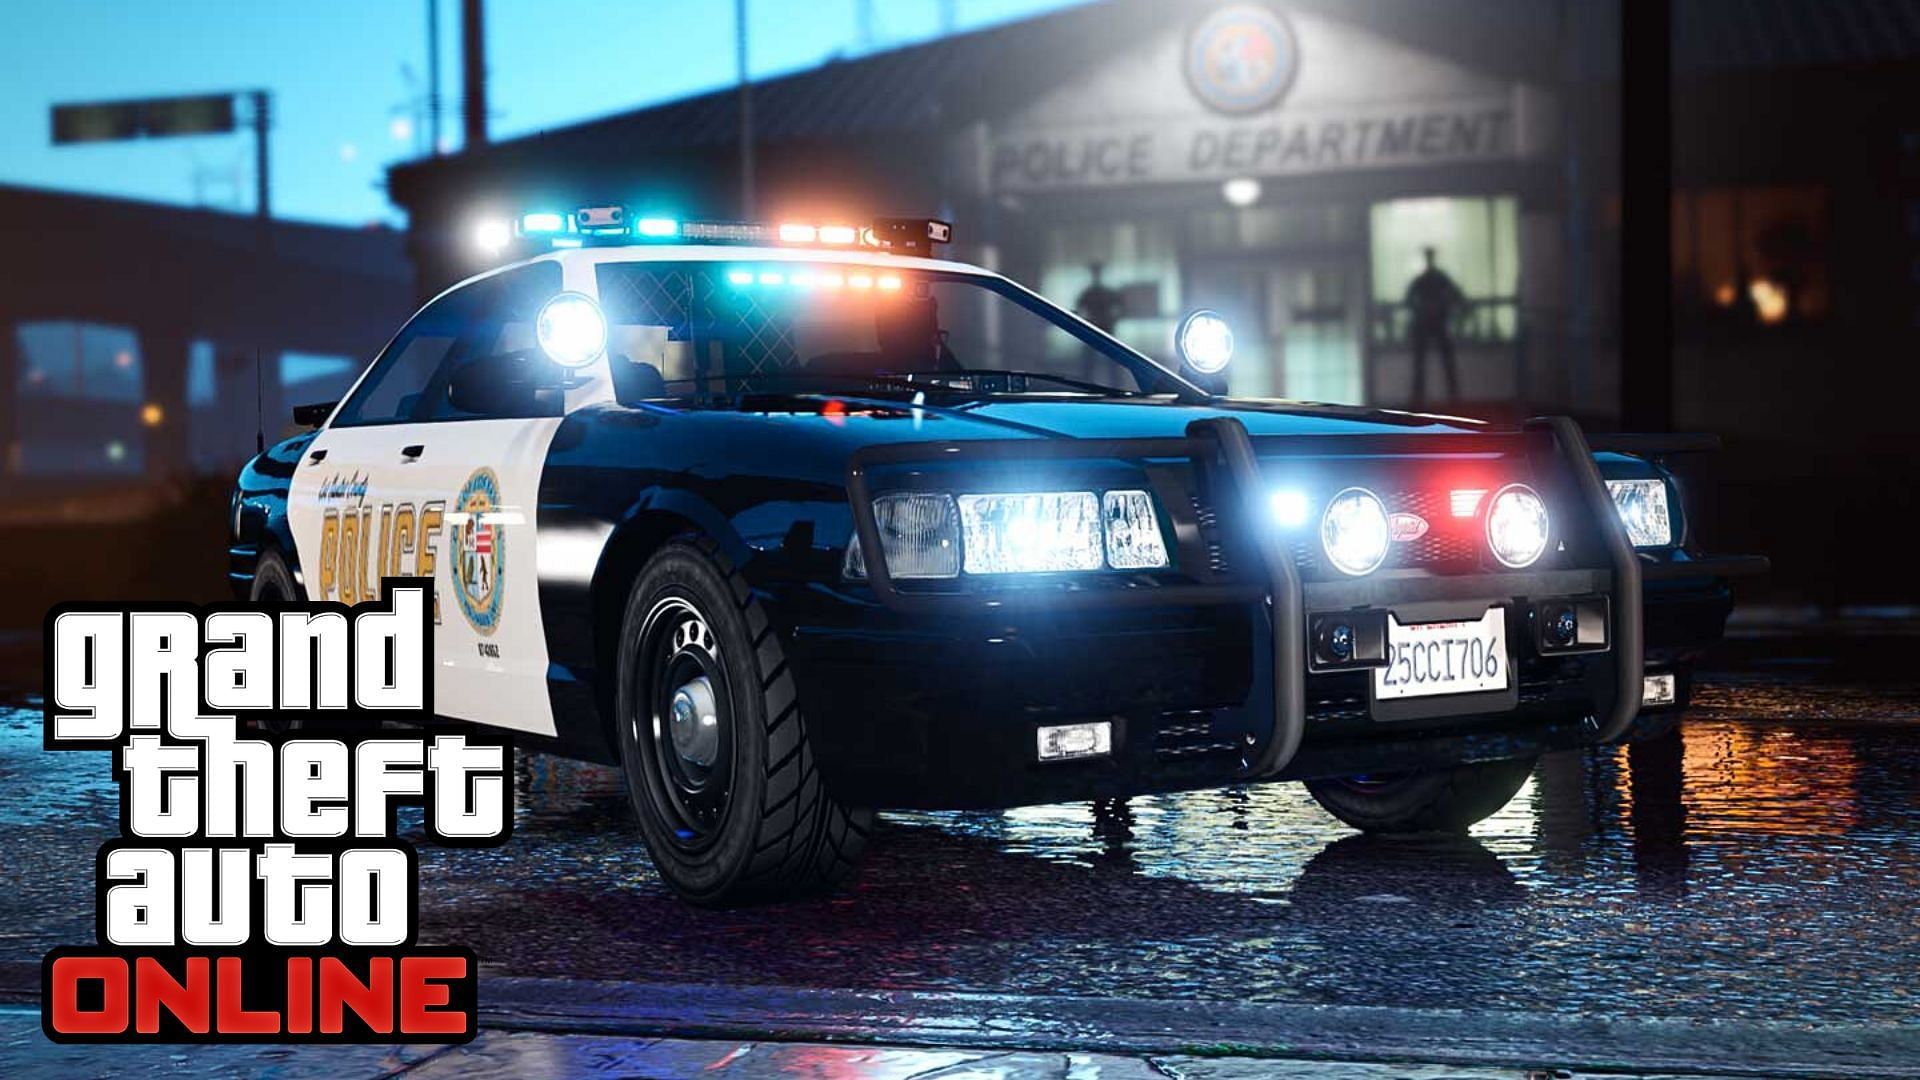 Vigilante missions are yet to be added in GTA Online (Image via Rockstar Games)